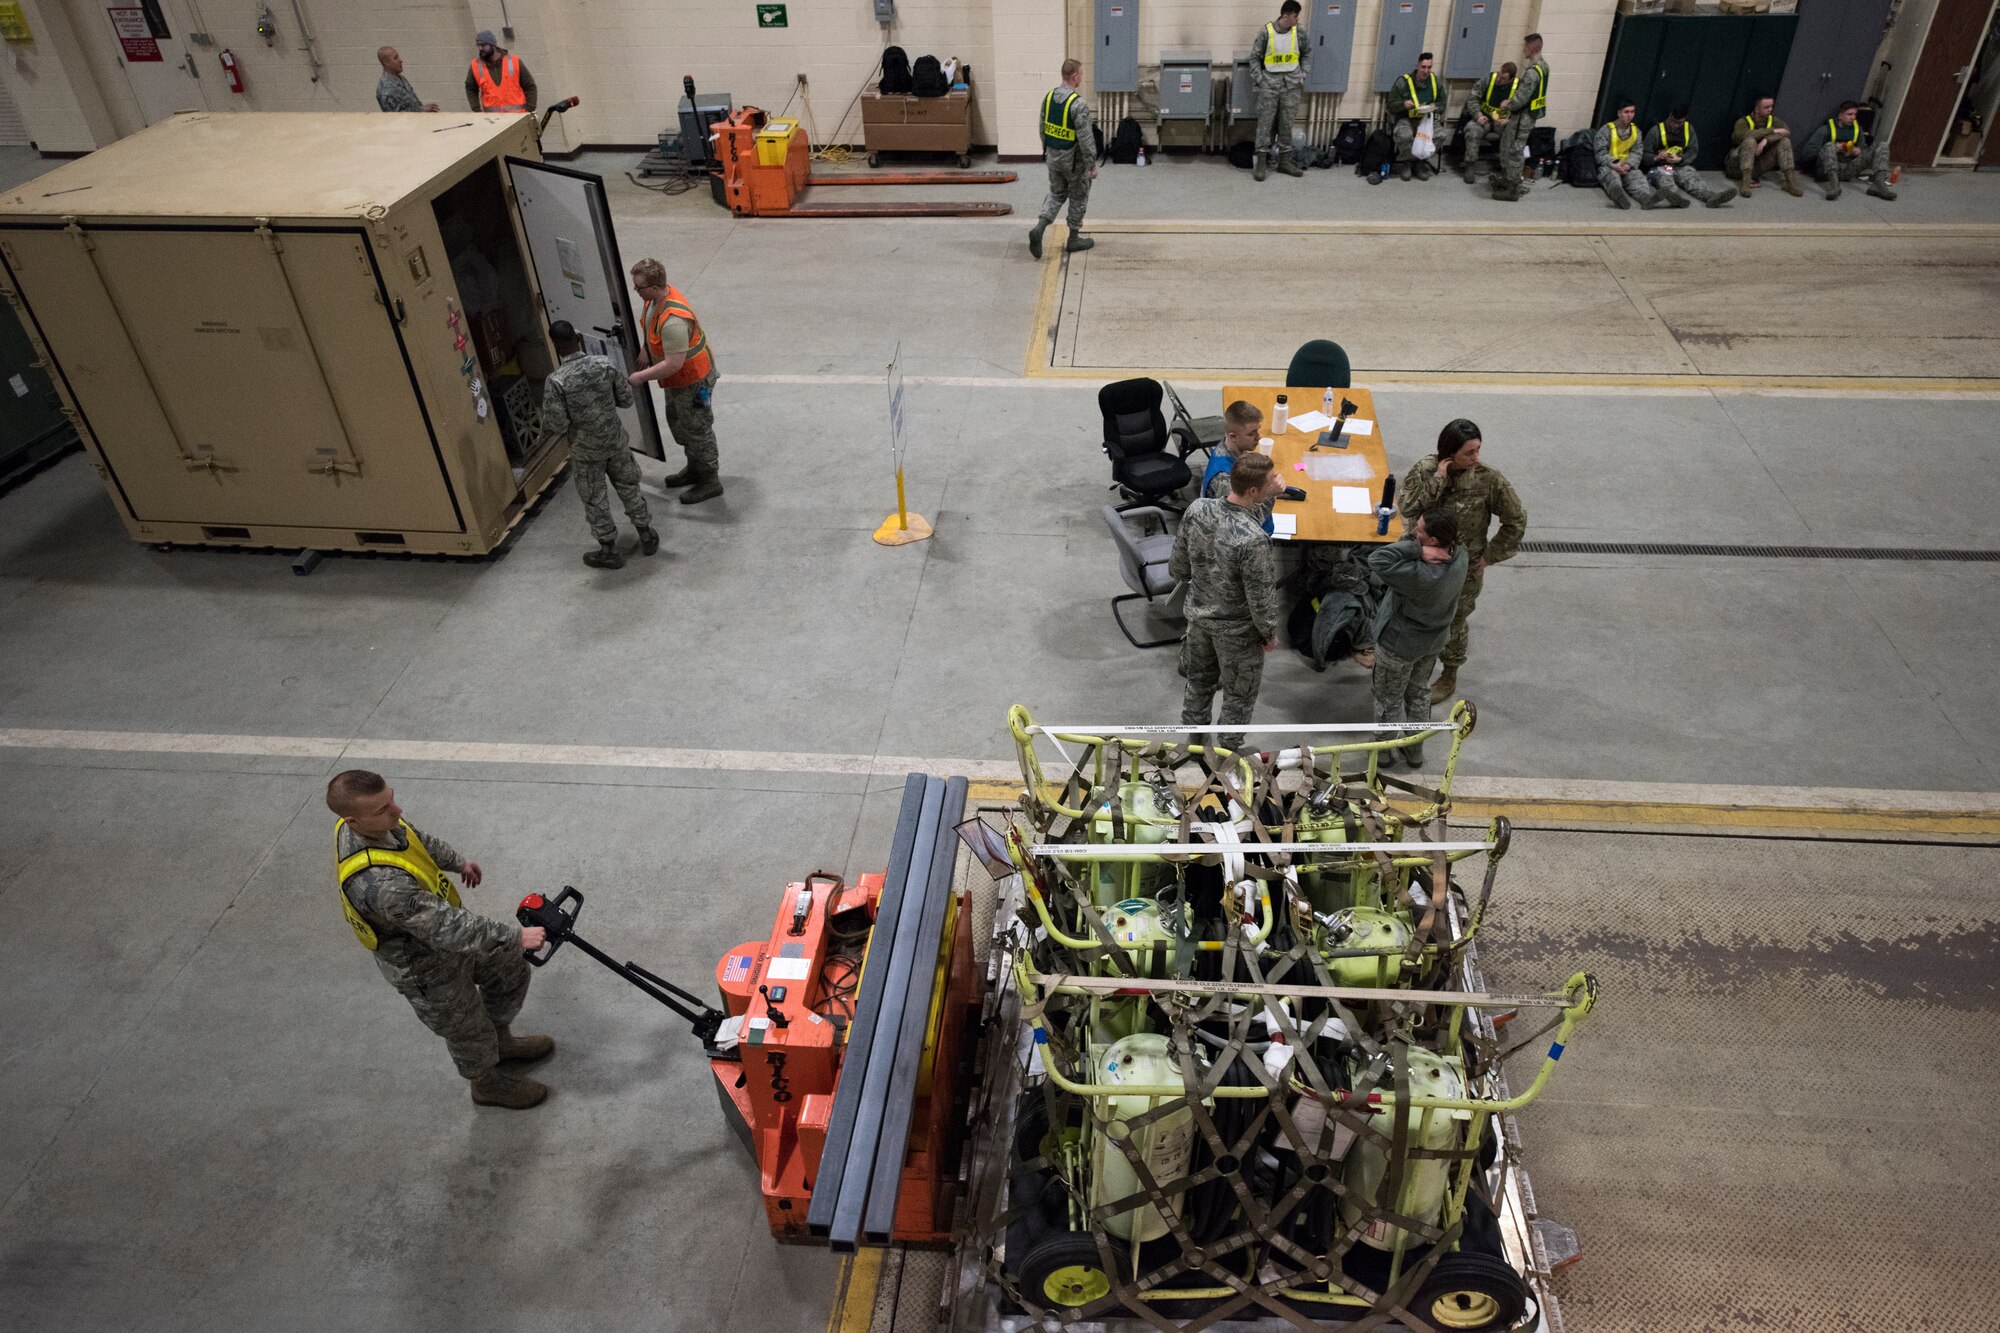 Airmen process pallets during Polar Force 19-4 at Joint Base Elmendorf-Richardson, Alaska, March 24, 2019. Polar Force is a two-week exercise designed to test JBER’s mission readiness. Exercises like this, strengthen and develop the skills service members require when facing adverse situations.